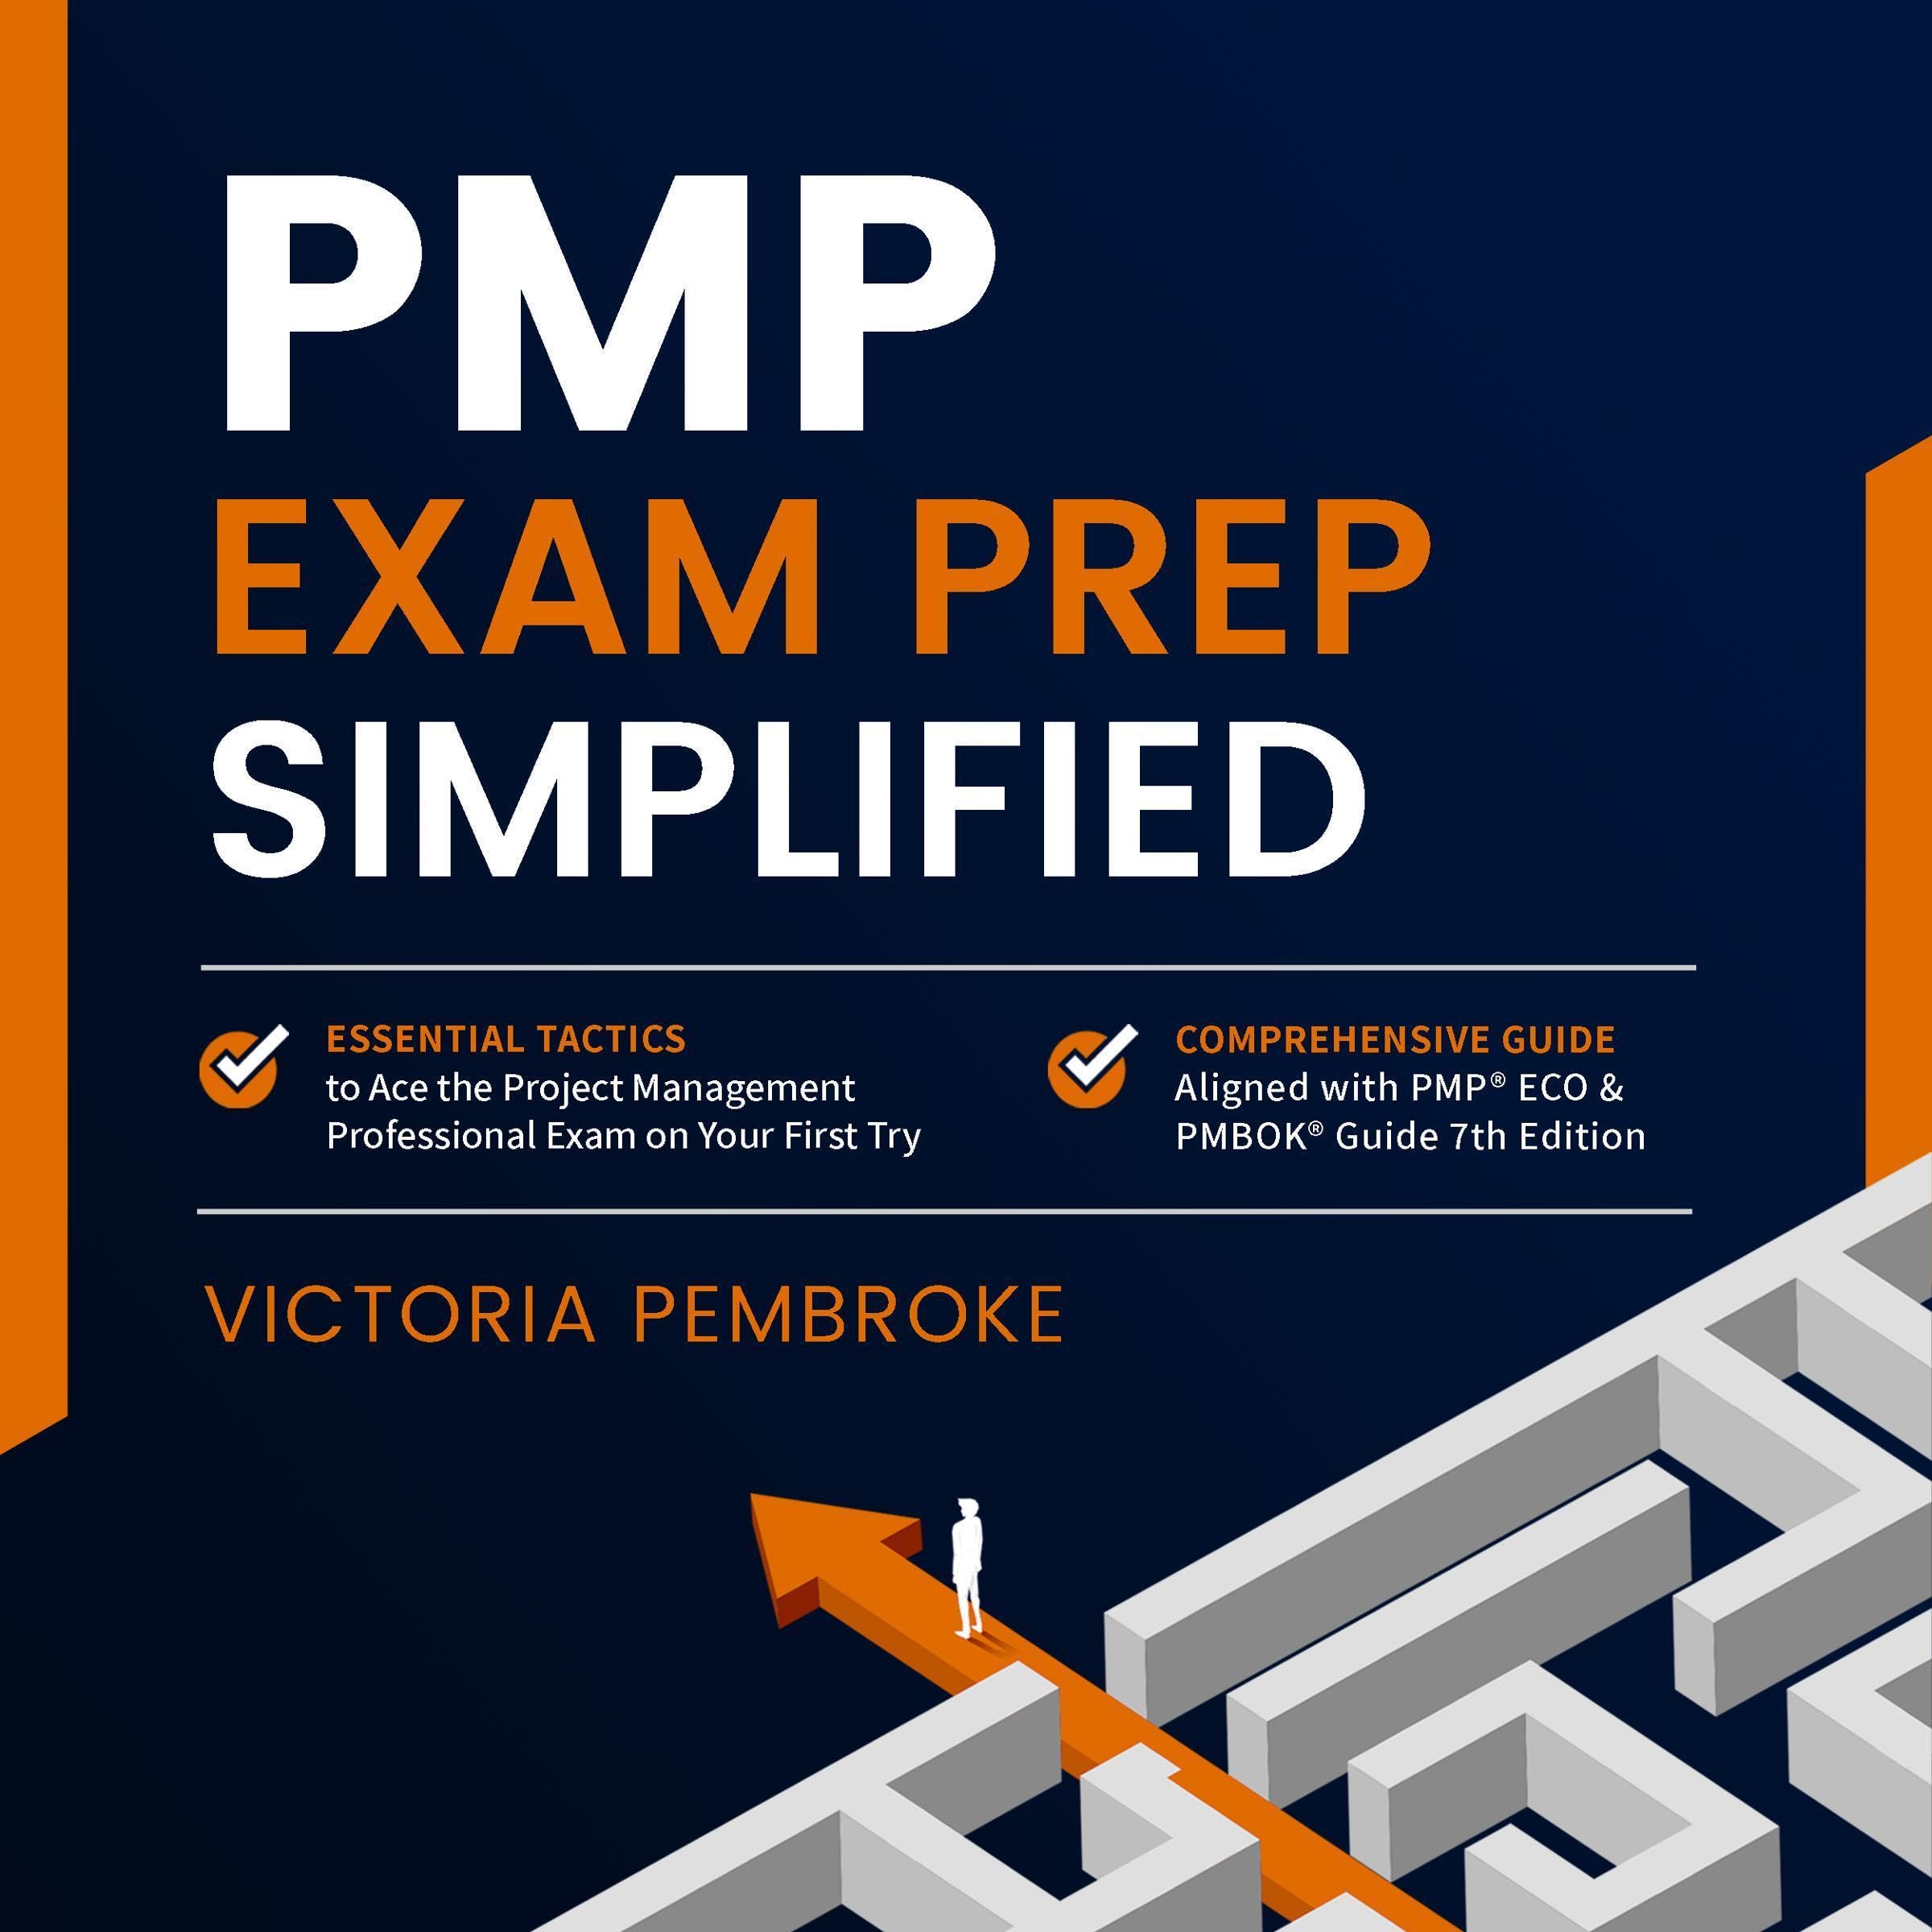 PMP Exam Prep Simplified: Essential Tactics to Ace the Project Management Professional Exam on Your First Try